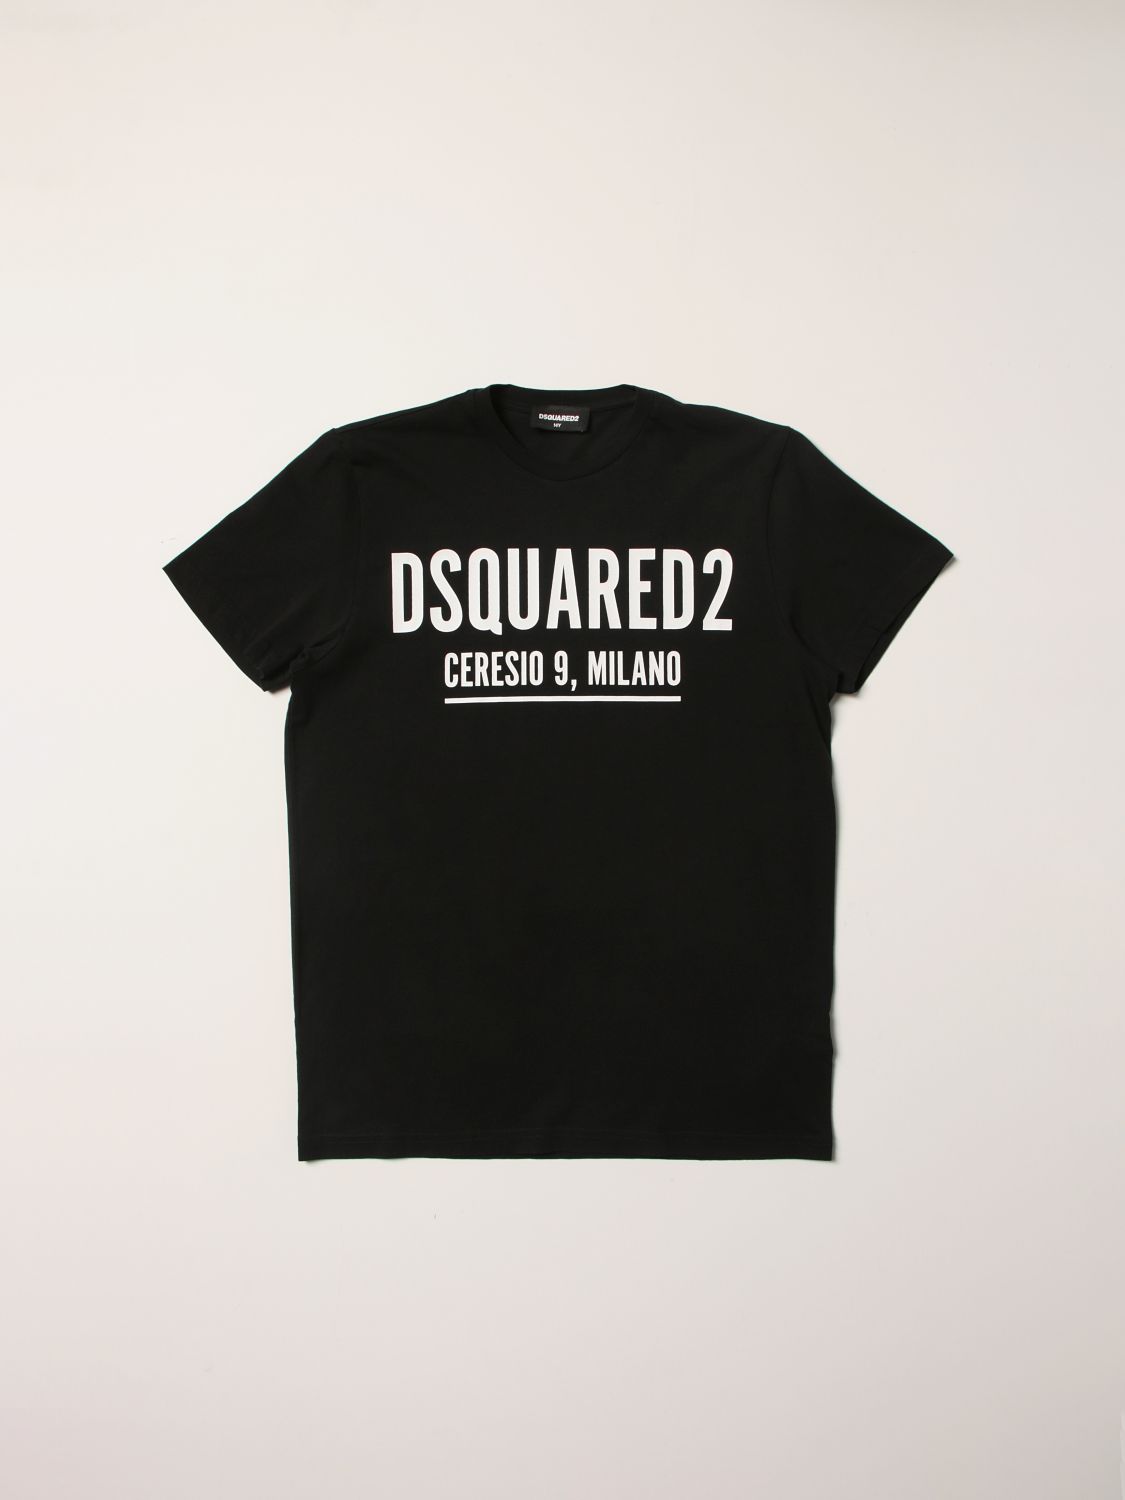 Dsquared2 Junior Outlet: T-shirt in cotton with logo - Black ...